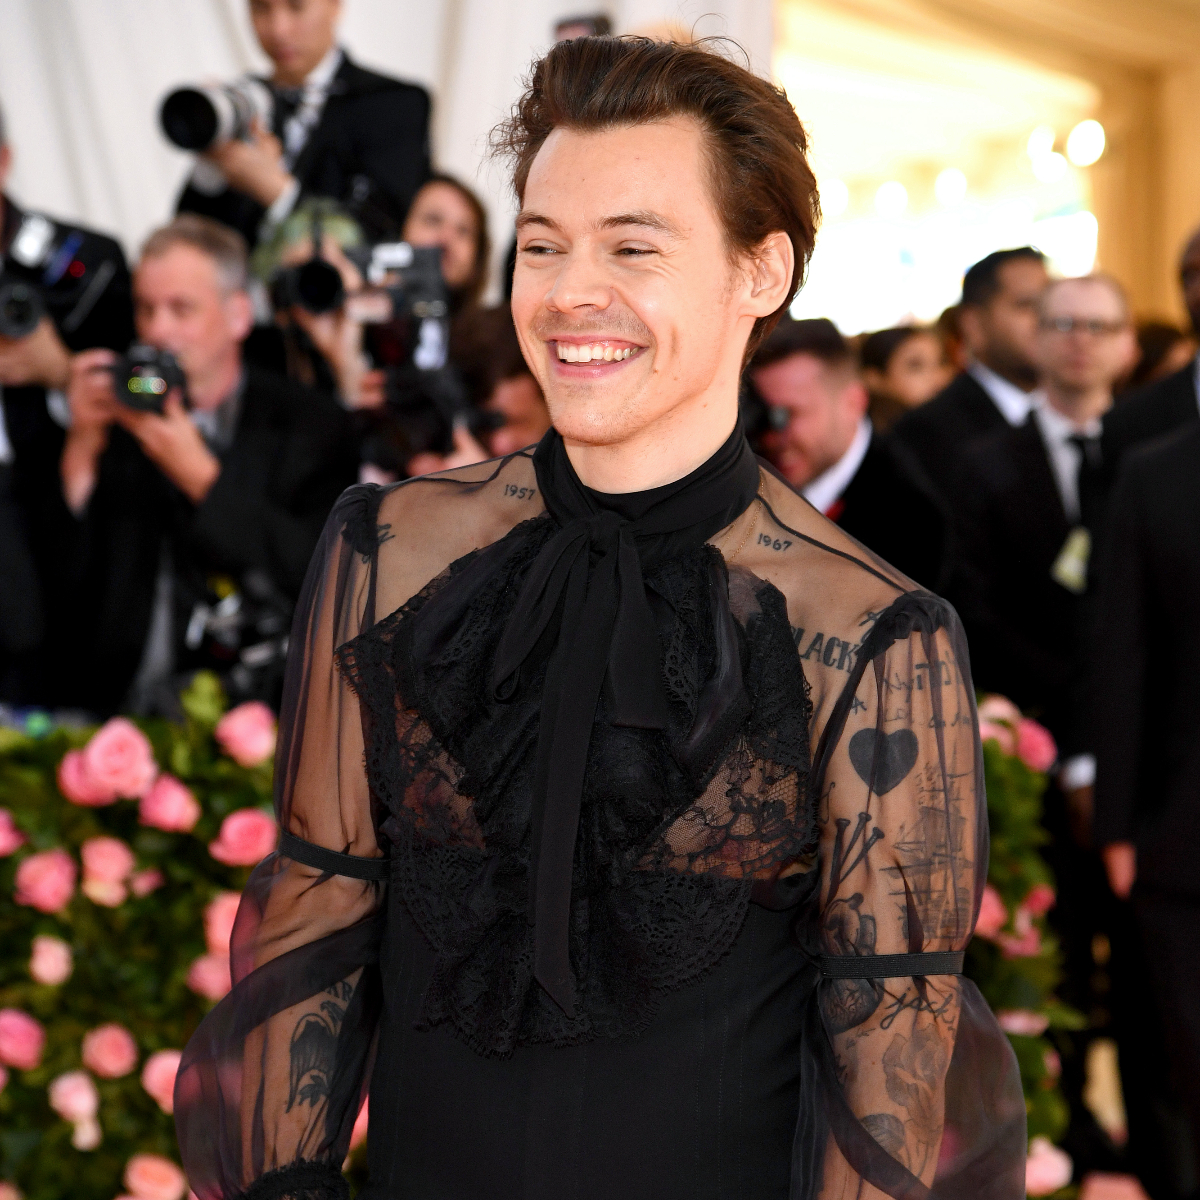 Harry Styles' charming smile